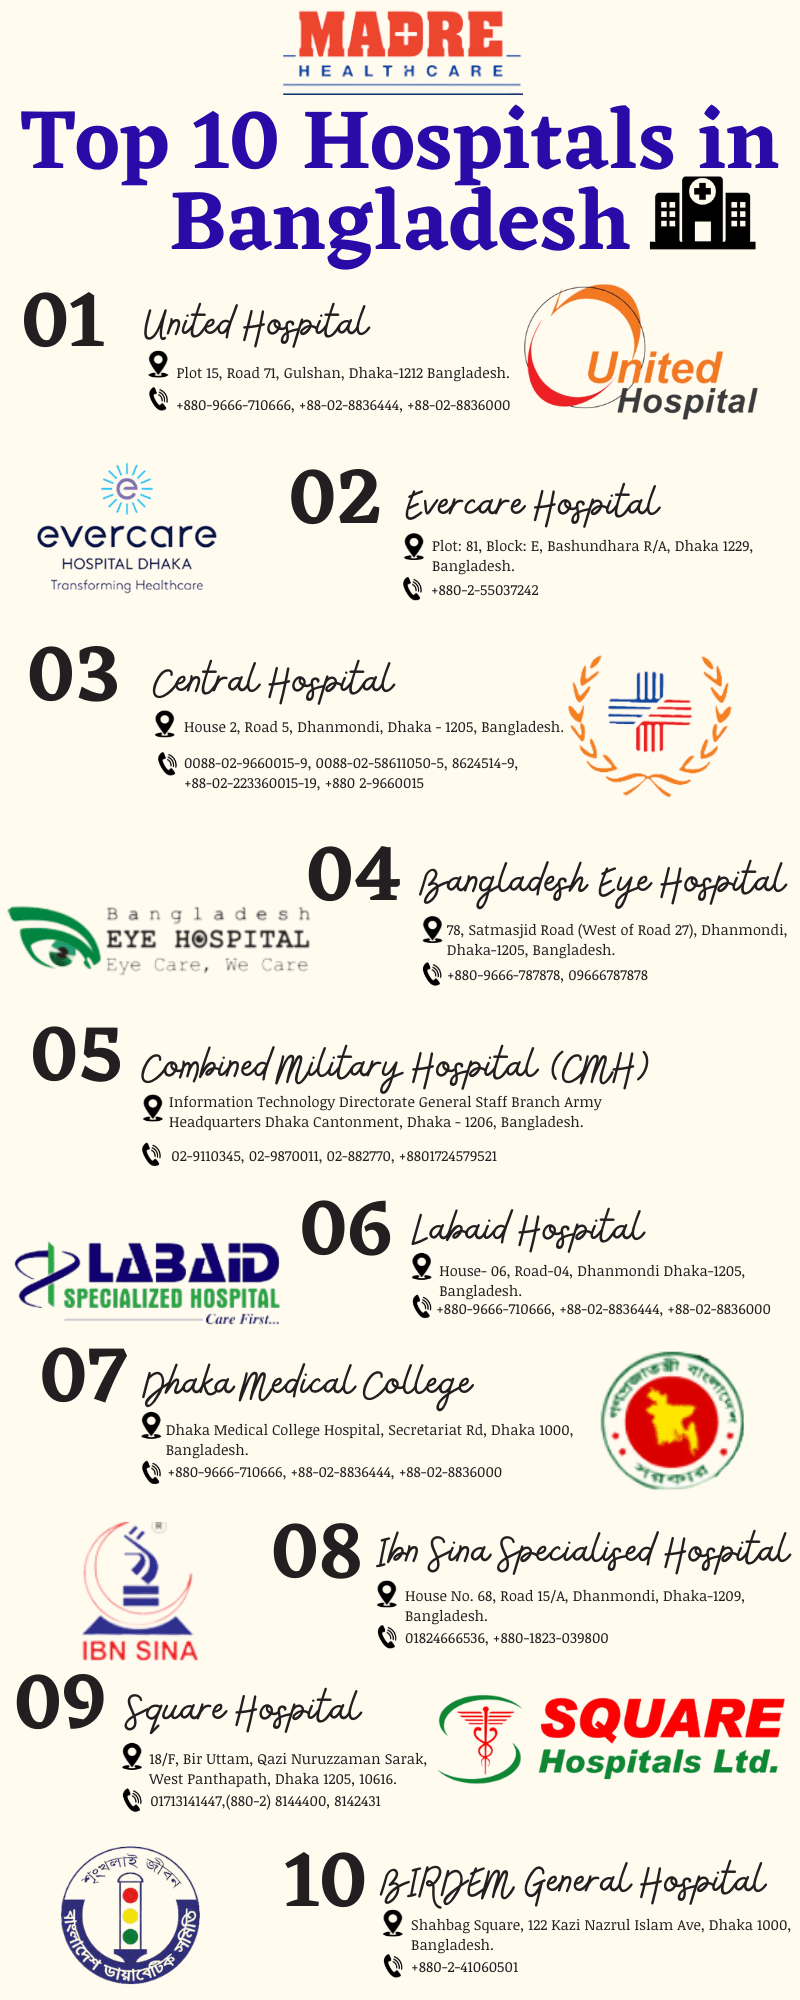 Top 10 Best Hospitals in Bangladesh Infographic